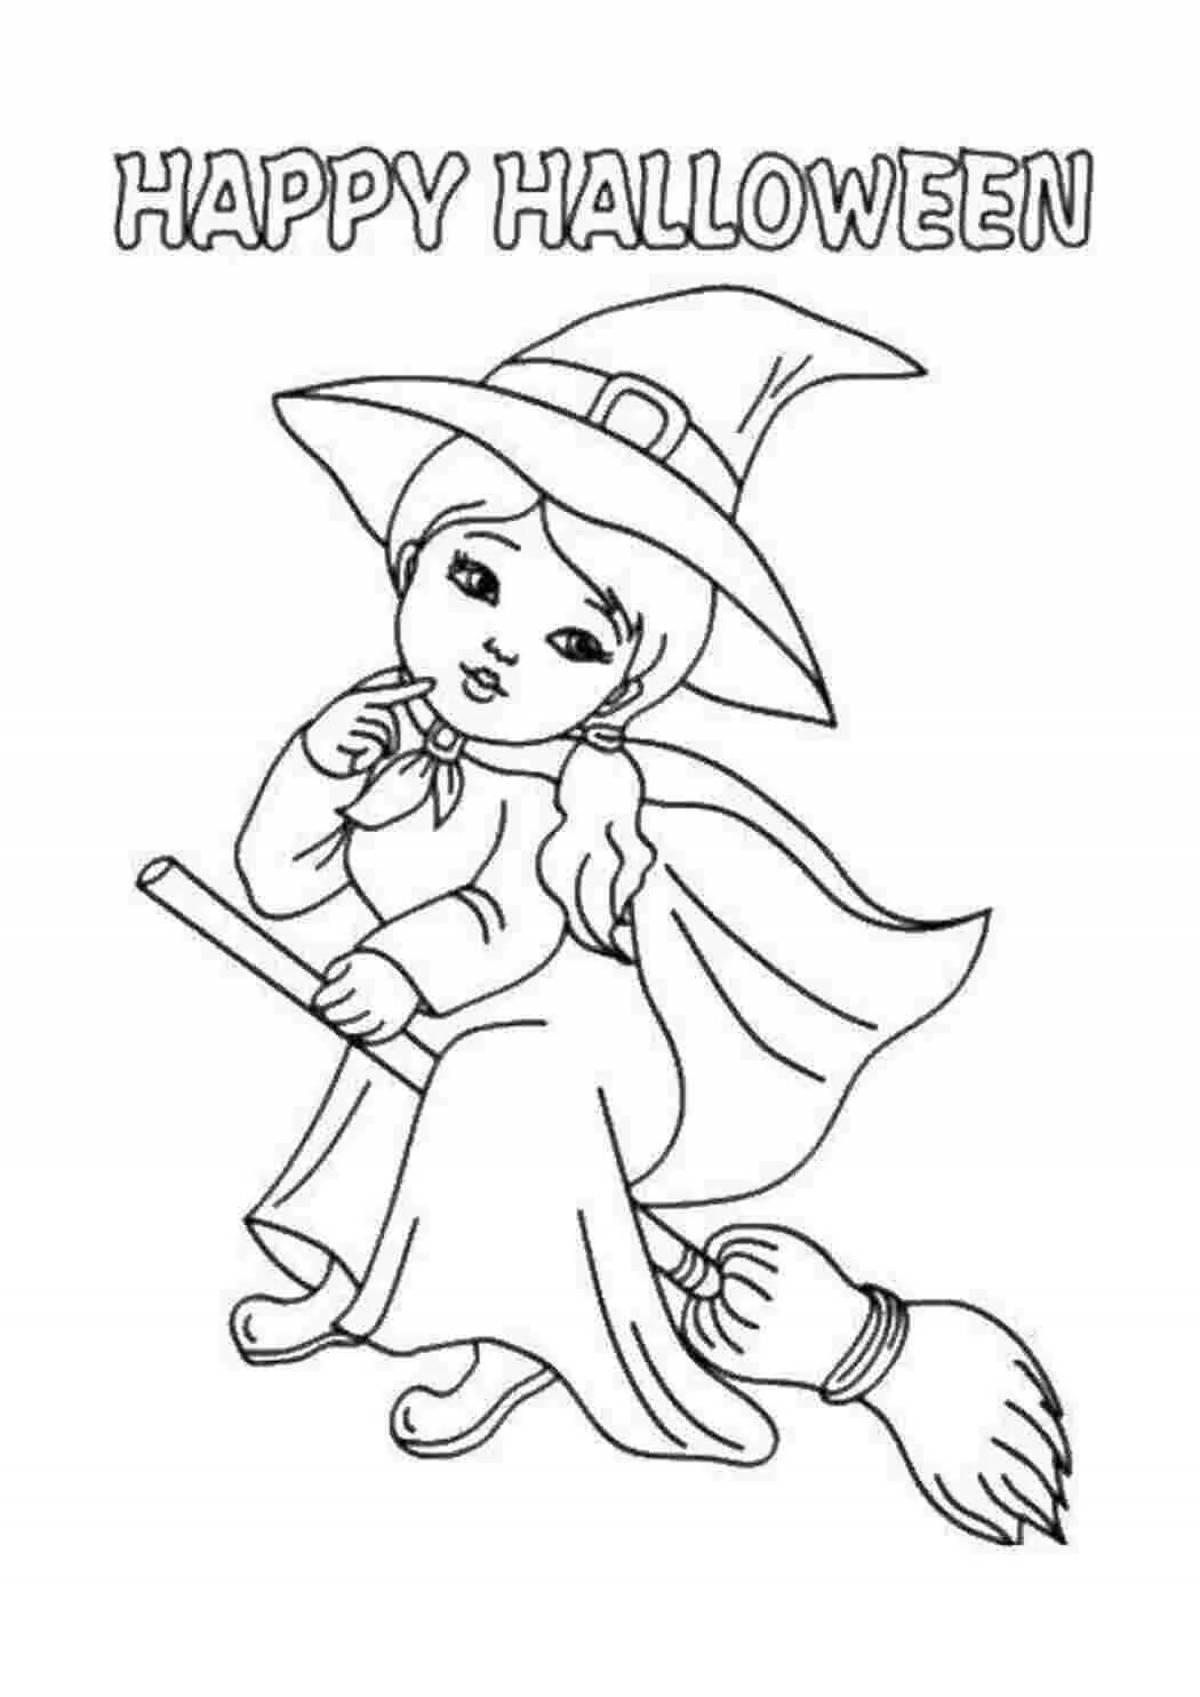 Joyful ai and witch coloring book